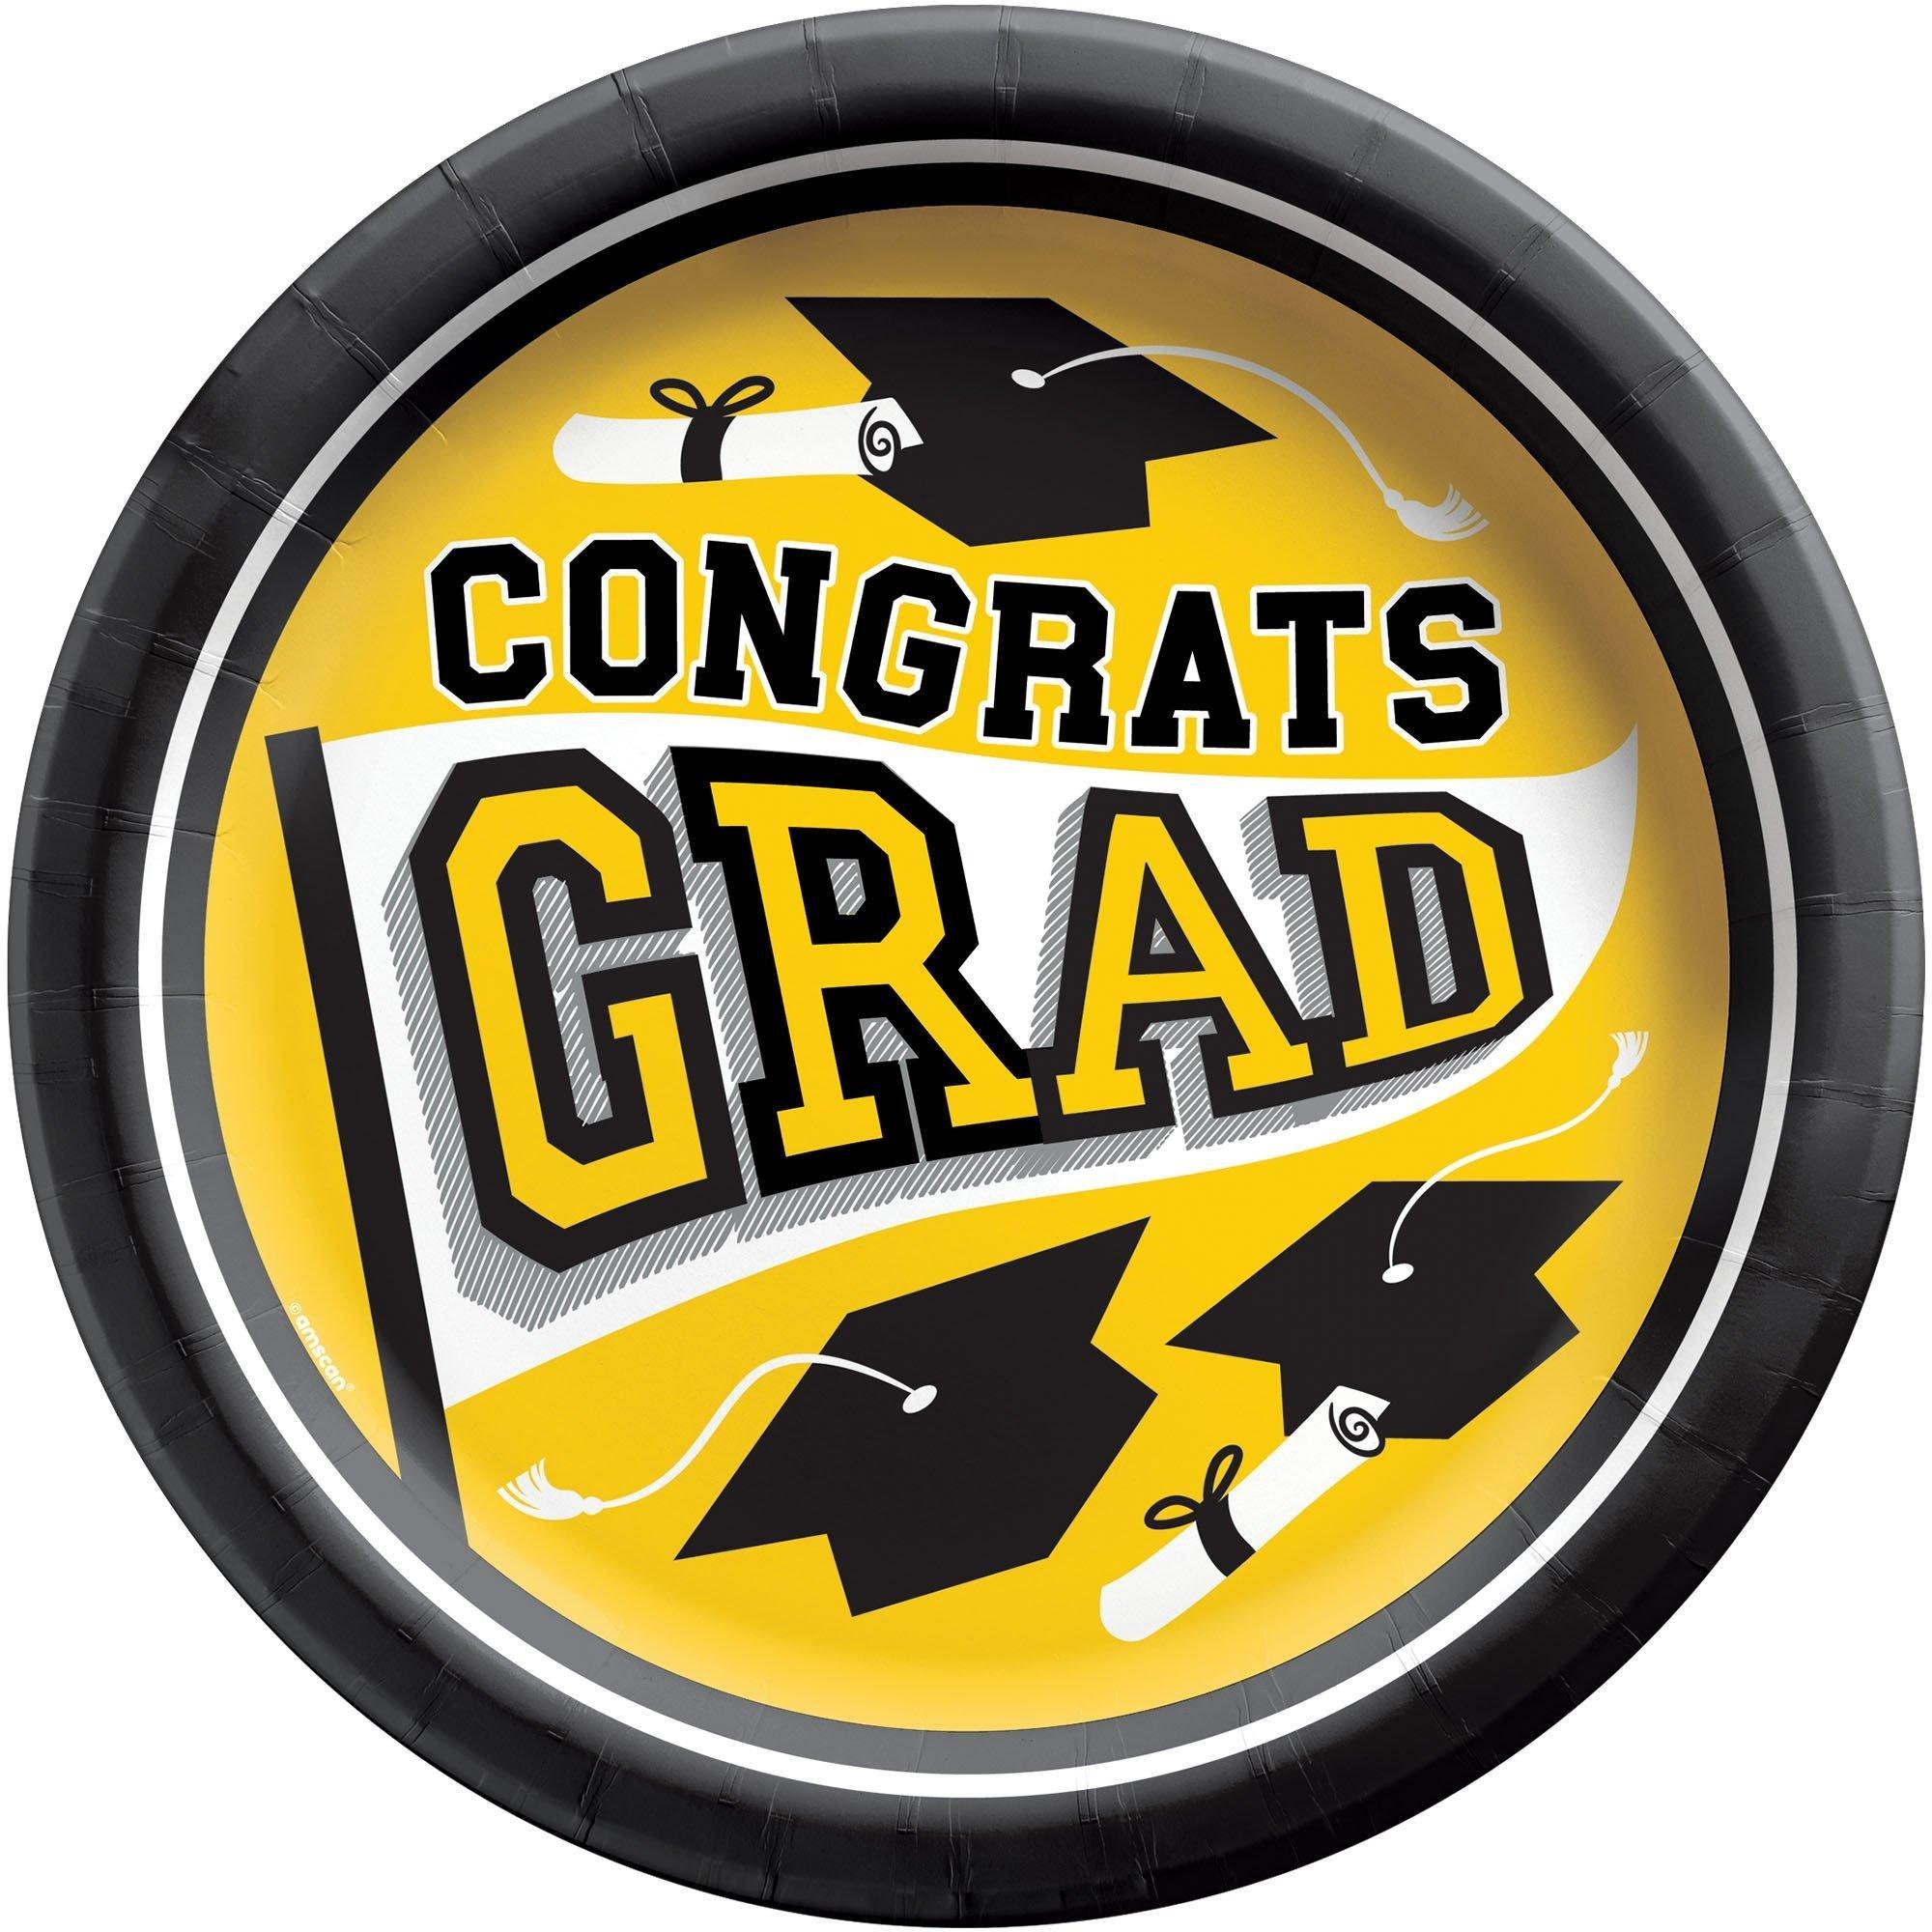 Graduation Party Supplies Kit for 80 with Decorations, Banners, Balloons, Plates, Napkins - Yellow Congrats Grad